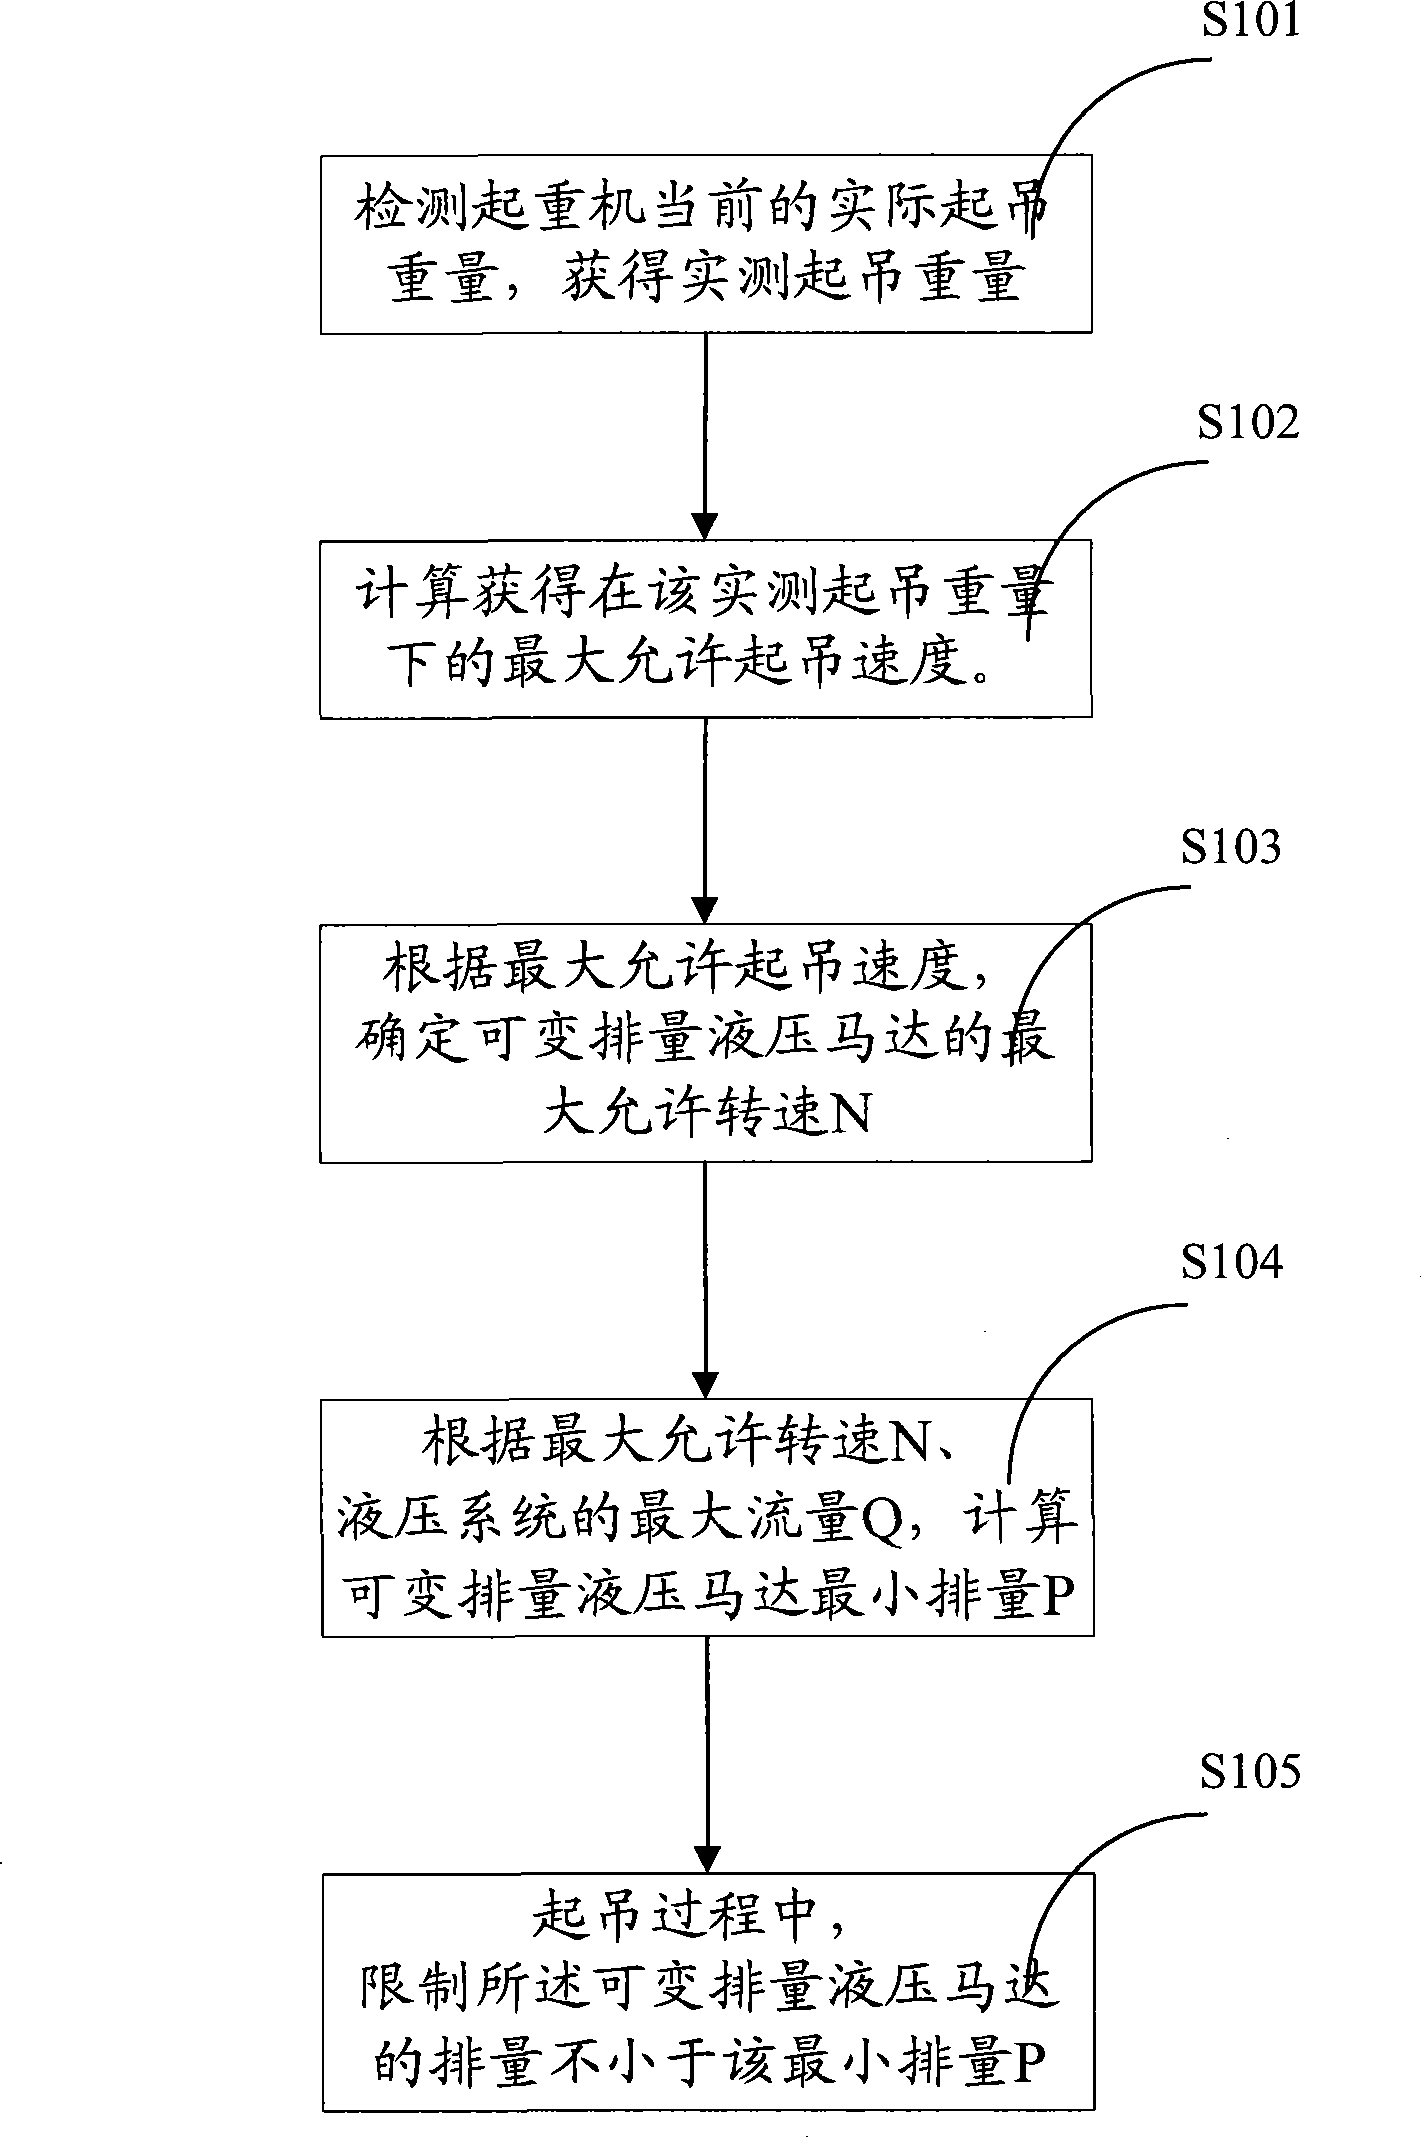 Crane lifting speed control method and device